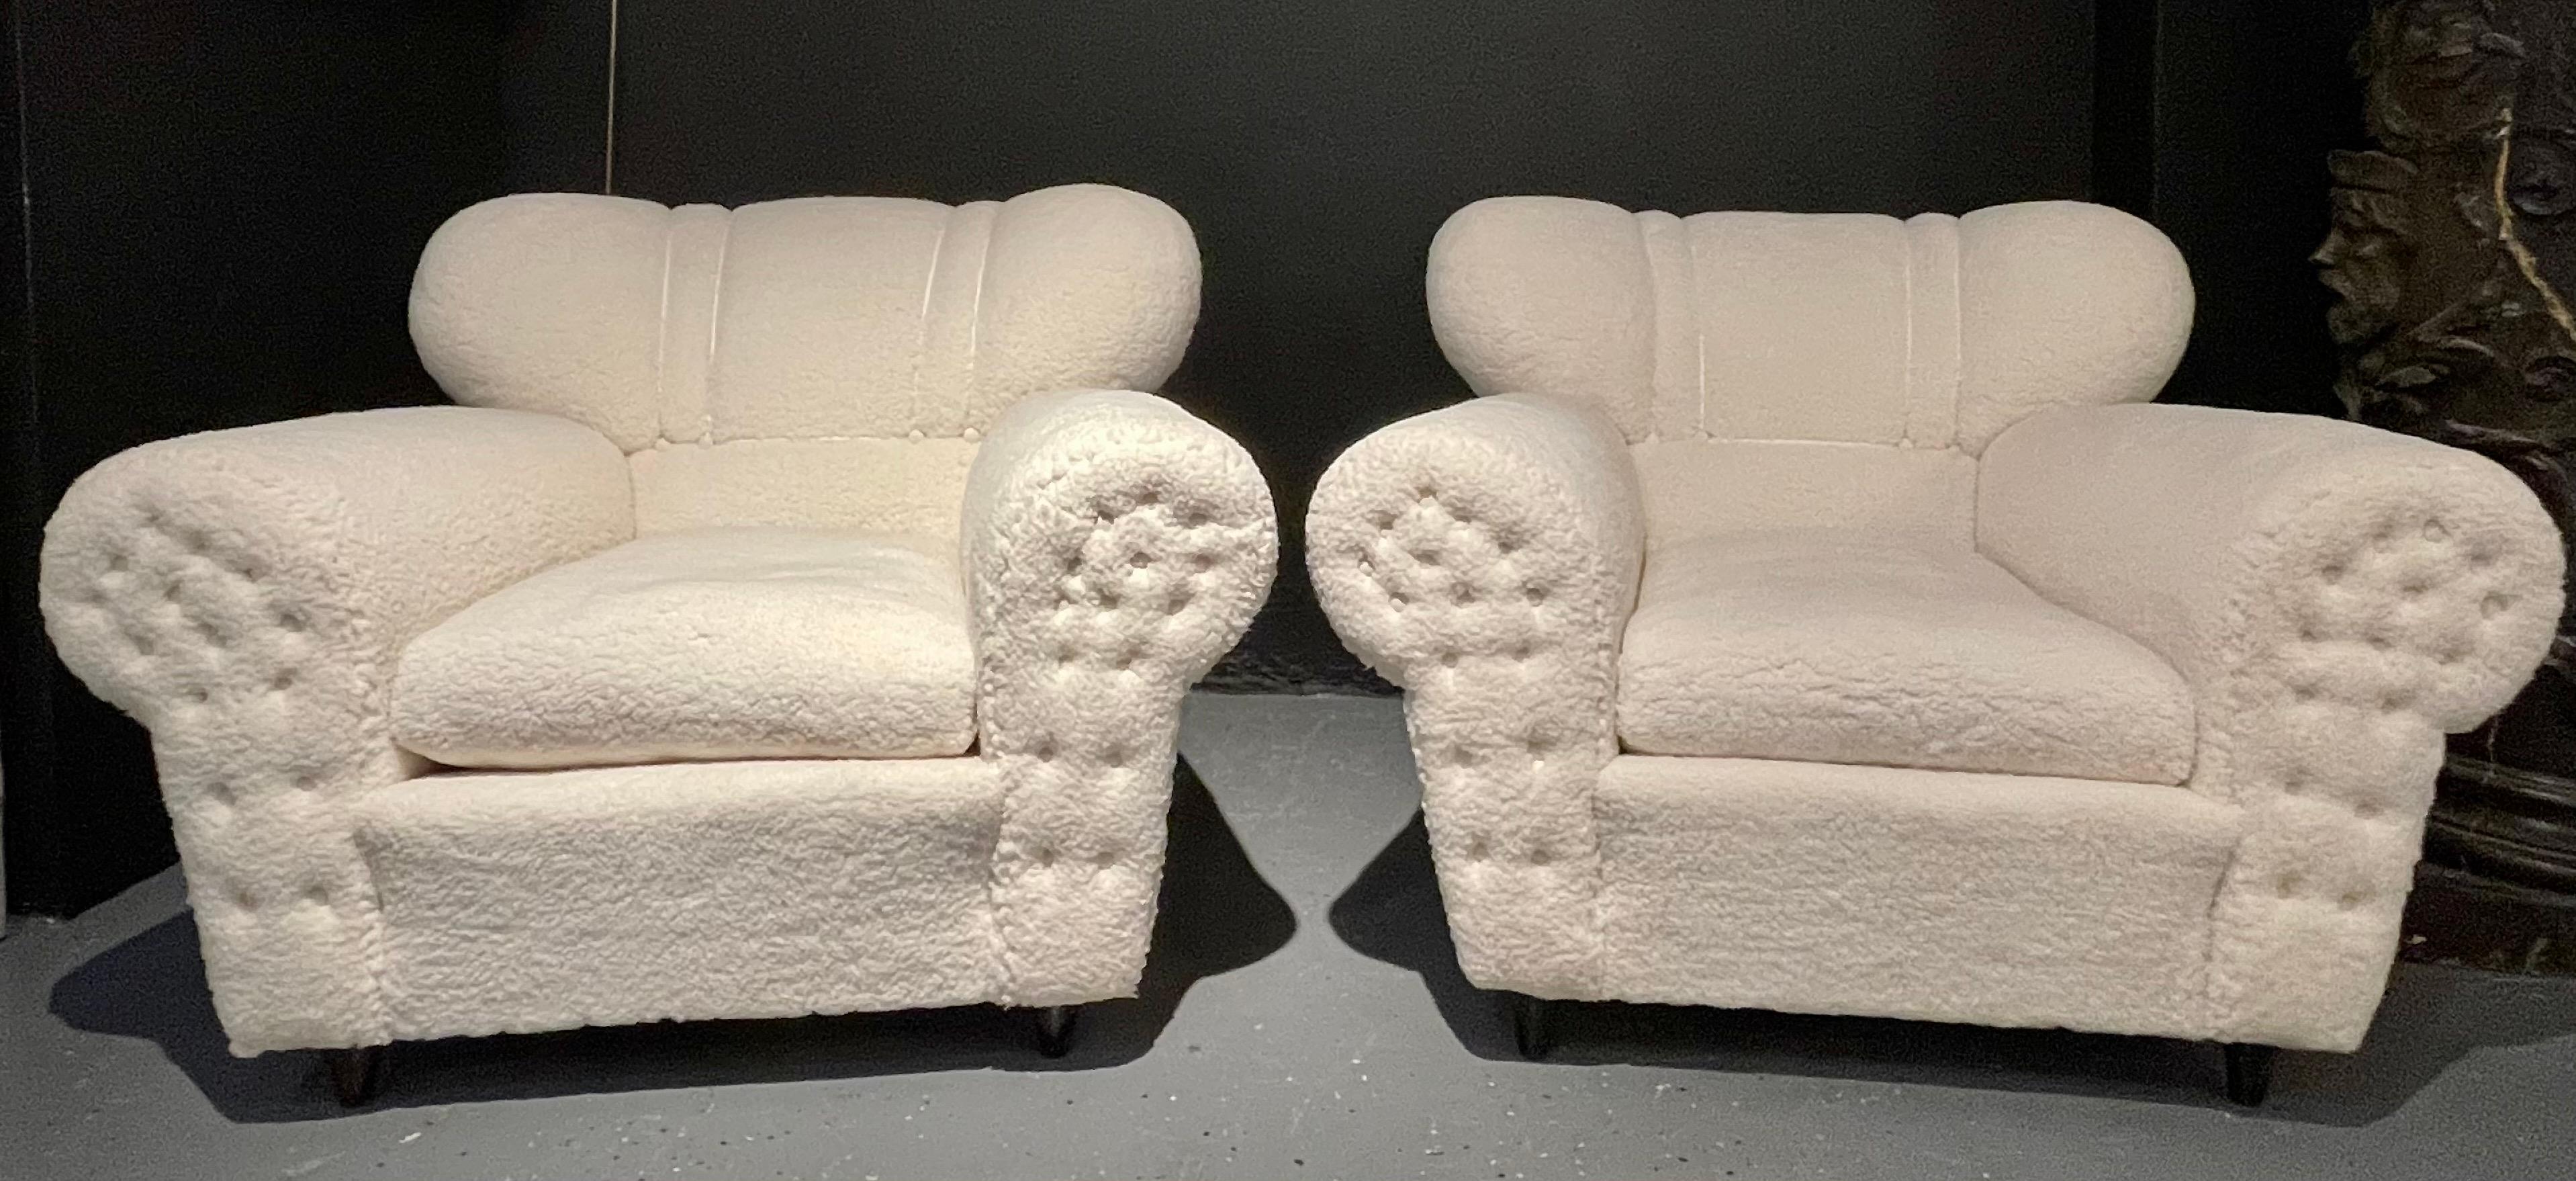 Italian Guglielmo Ulrich style lounge chairs. A fine pair from Italy, circa 1940s. Upholstered in a plush Sherpa style fabric with painted wood. Unsigned. Sleek and stylish are these oversized pair of lounge chairs with tufted armrest fronts.